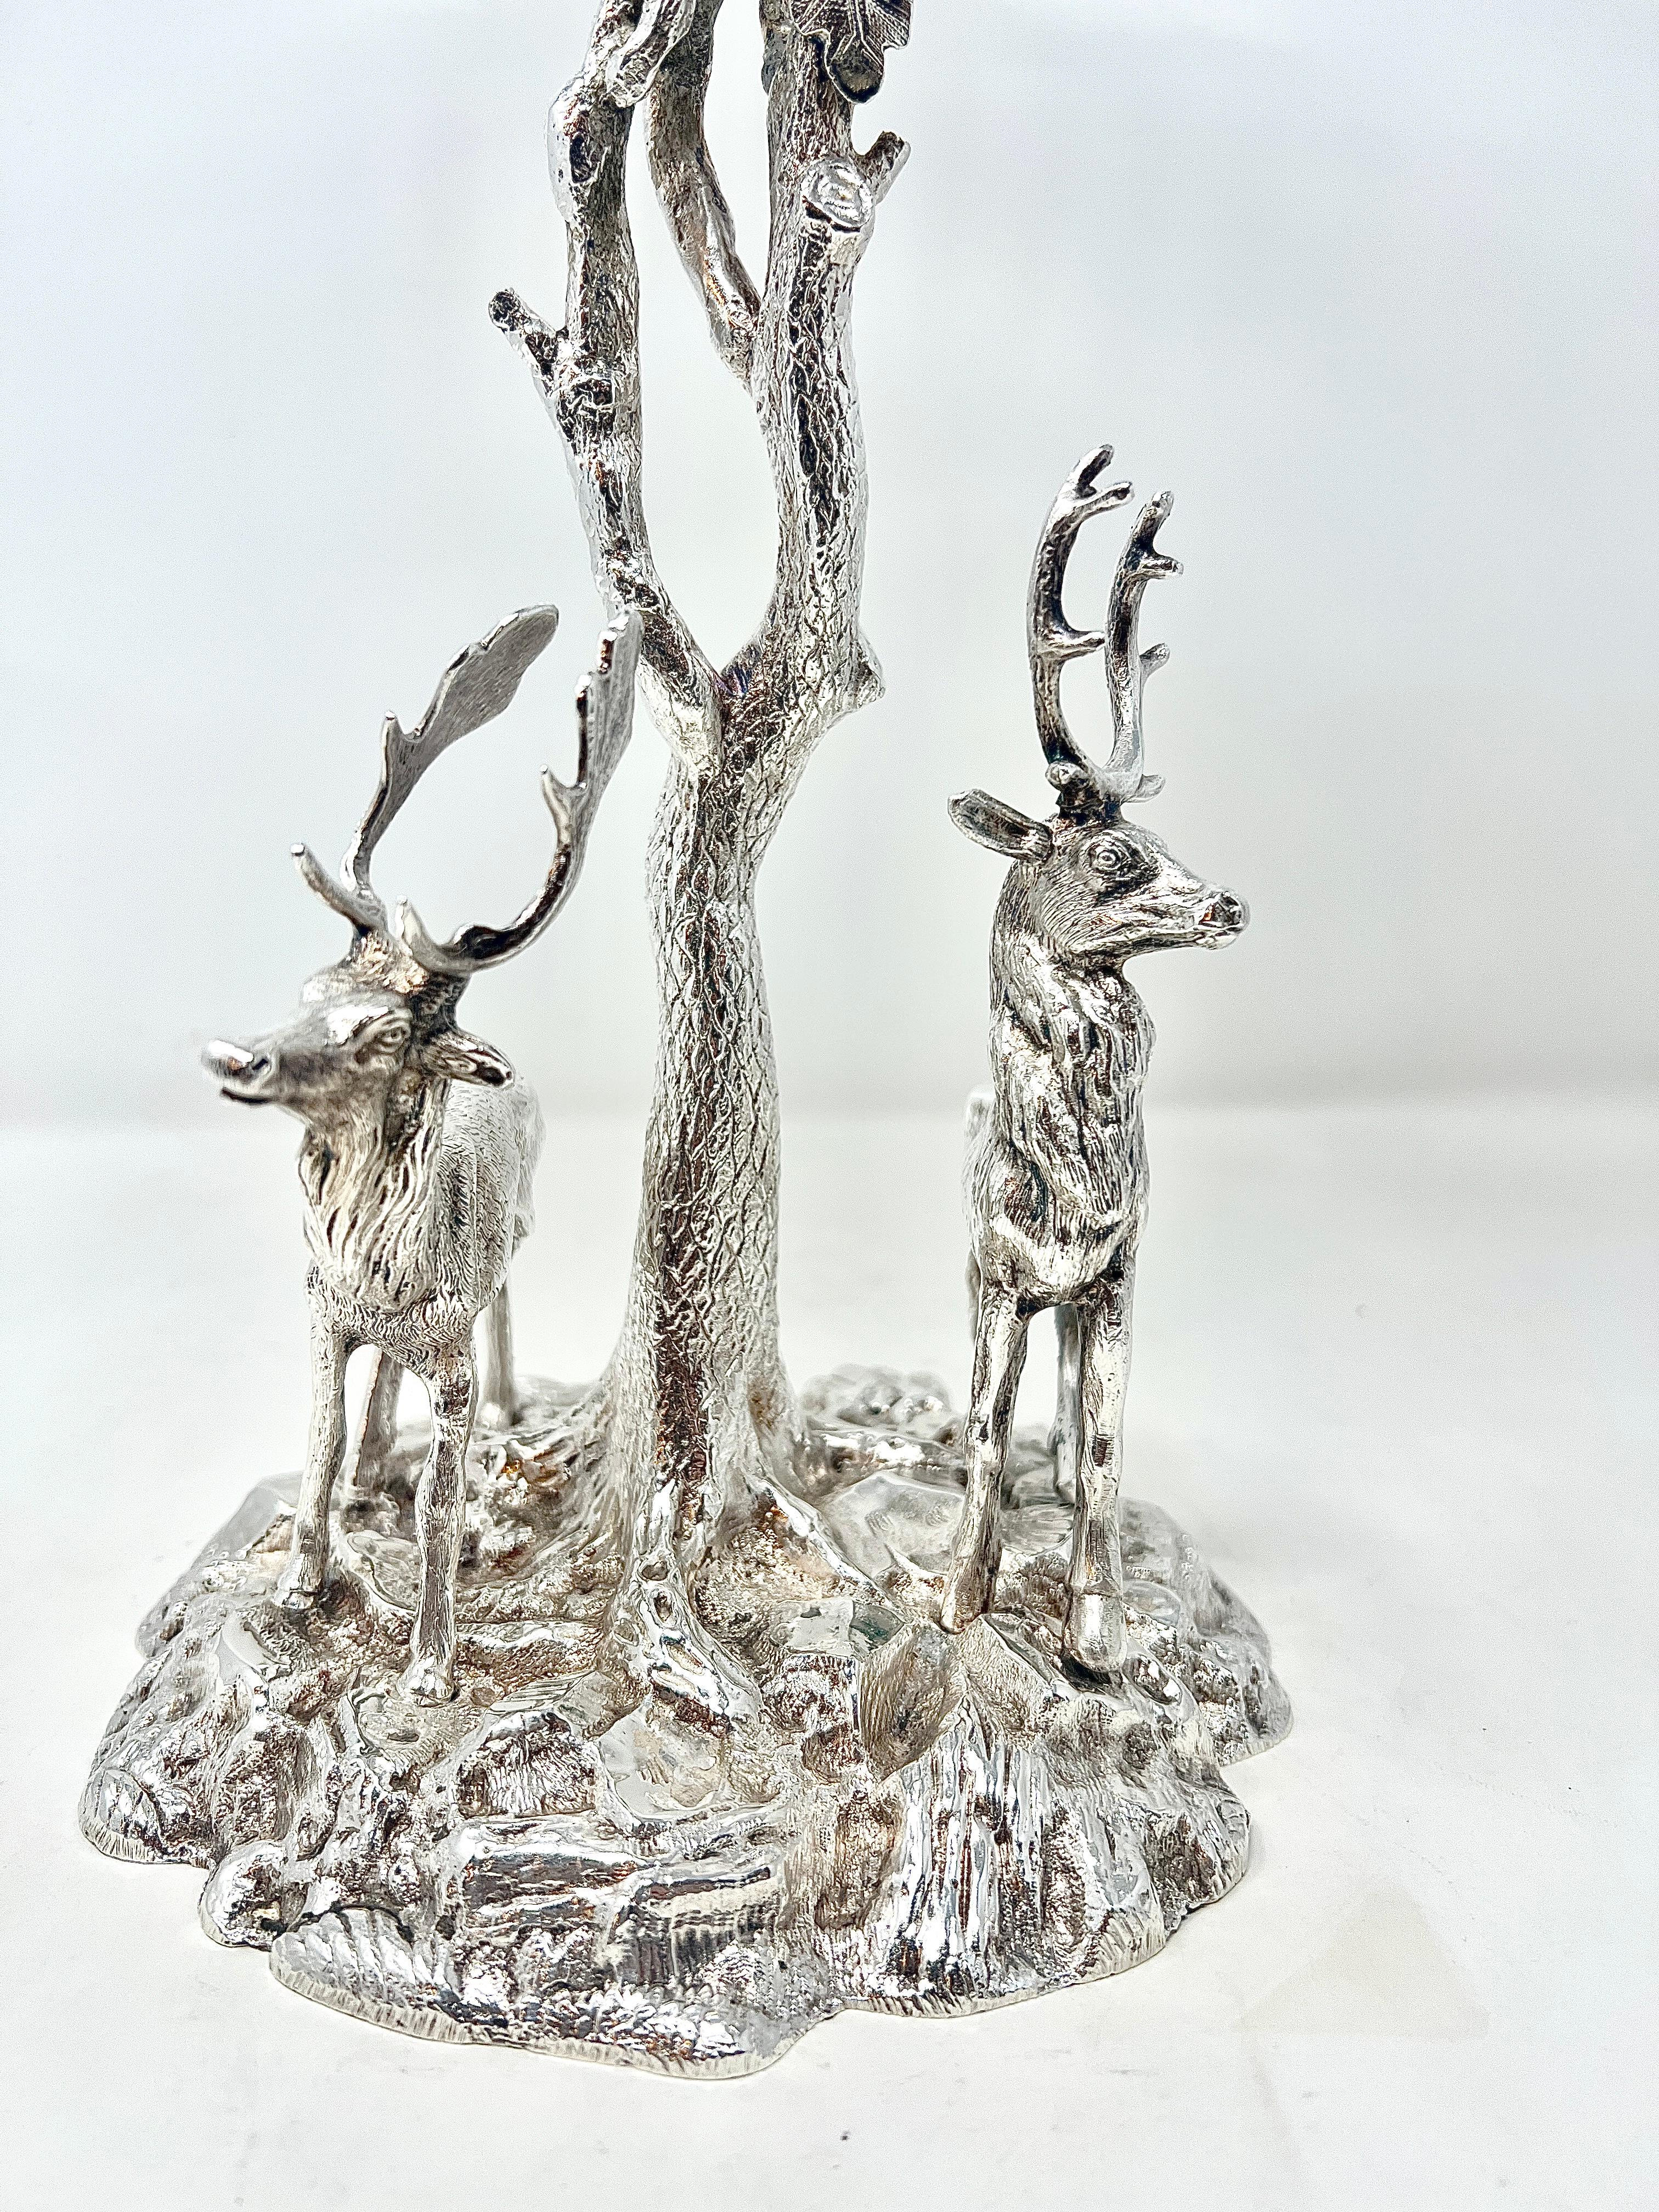 Stunning Antique English Cut Crystal and Sheffield Silver Epergne with Deer, Circa 1900's.